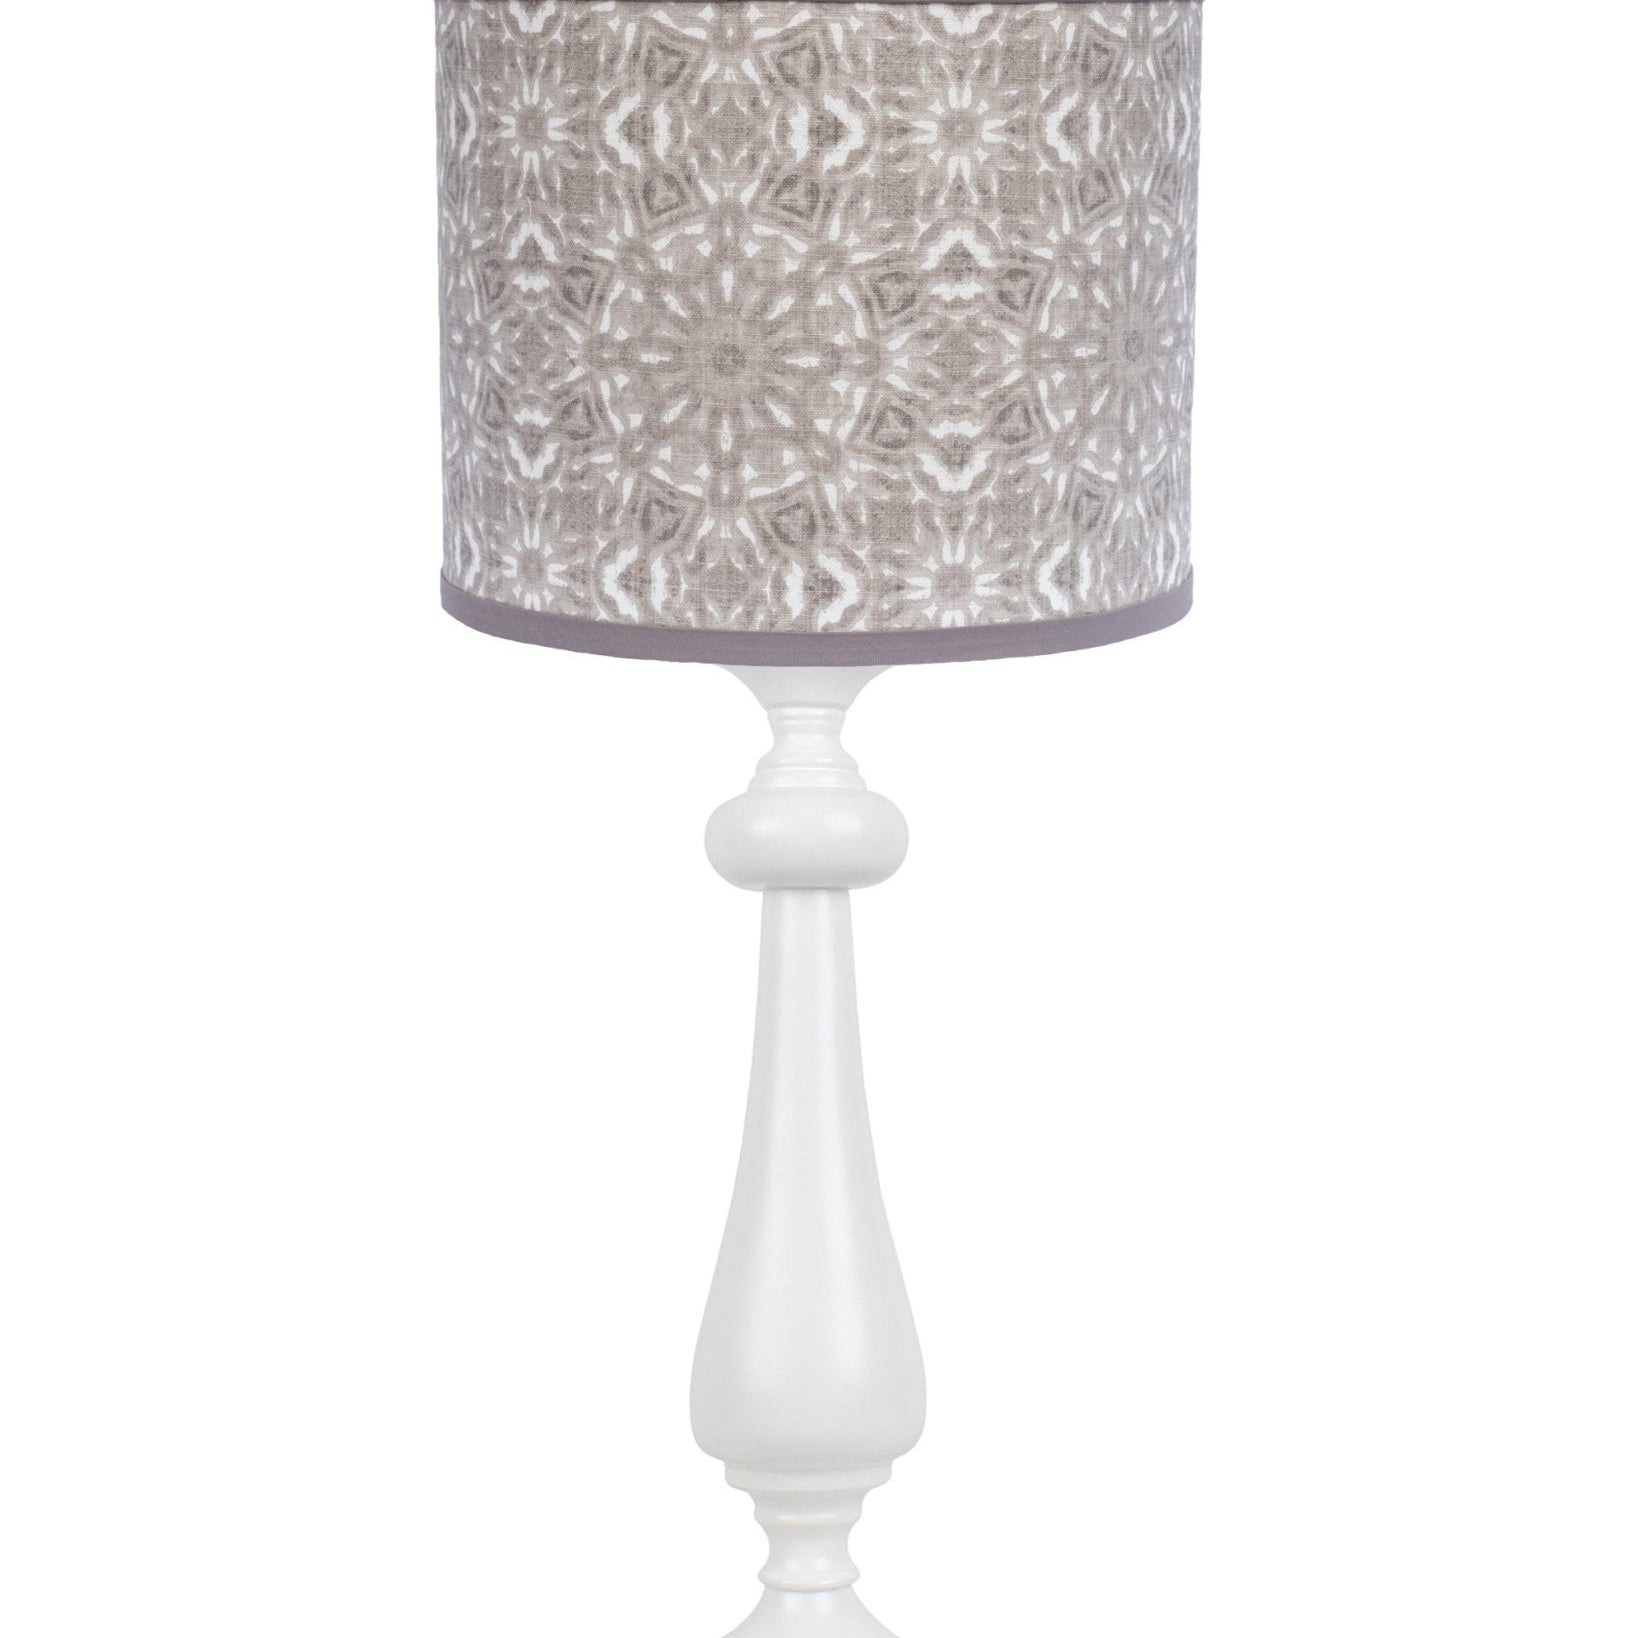 27" White Table Lamp With Gray Taupe Batik Print Drum Shade - Tuesday Morning-Table Lamps